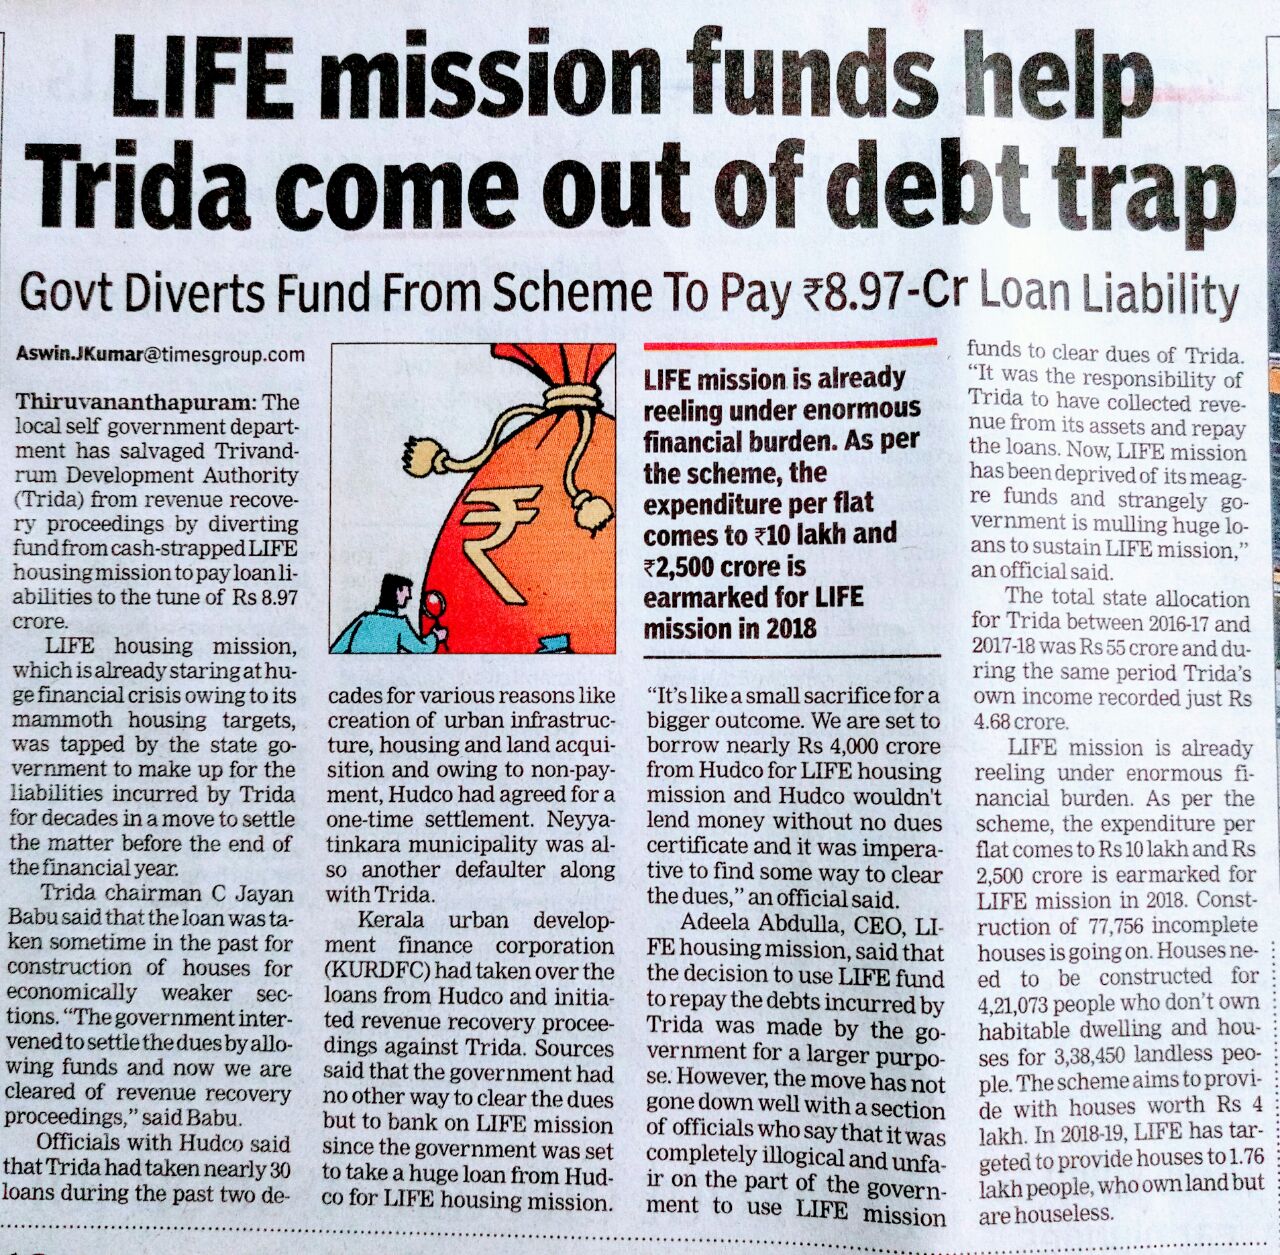 News on Life Mission in today's (3-4-2018) Times of India